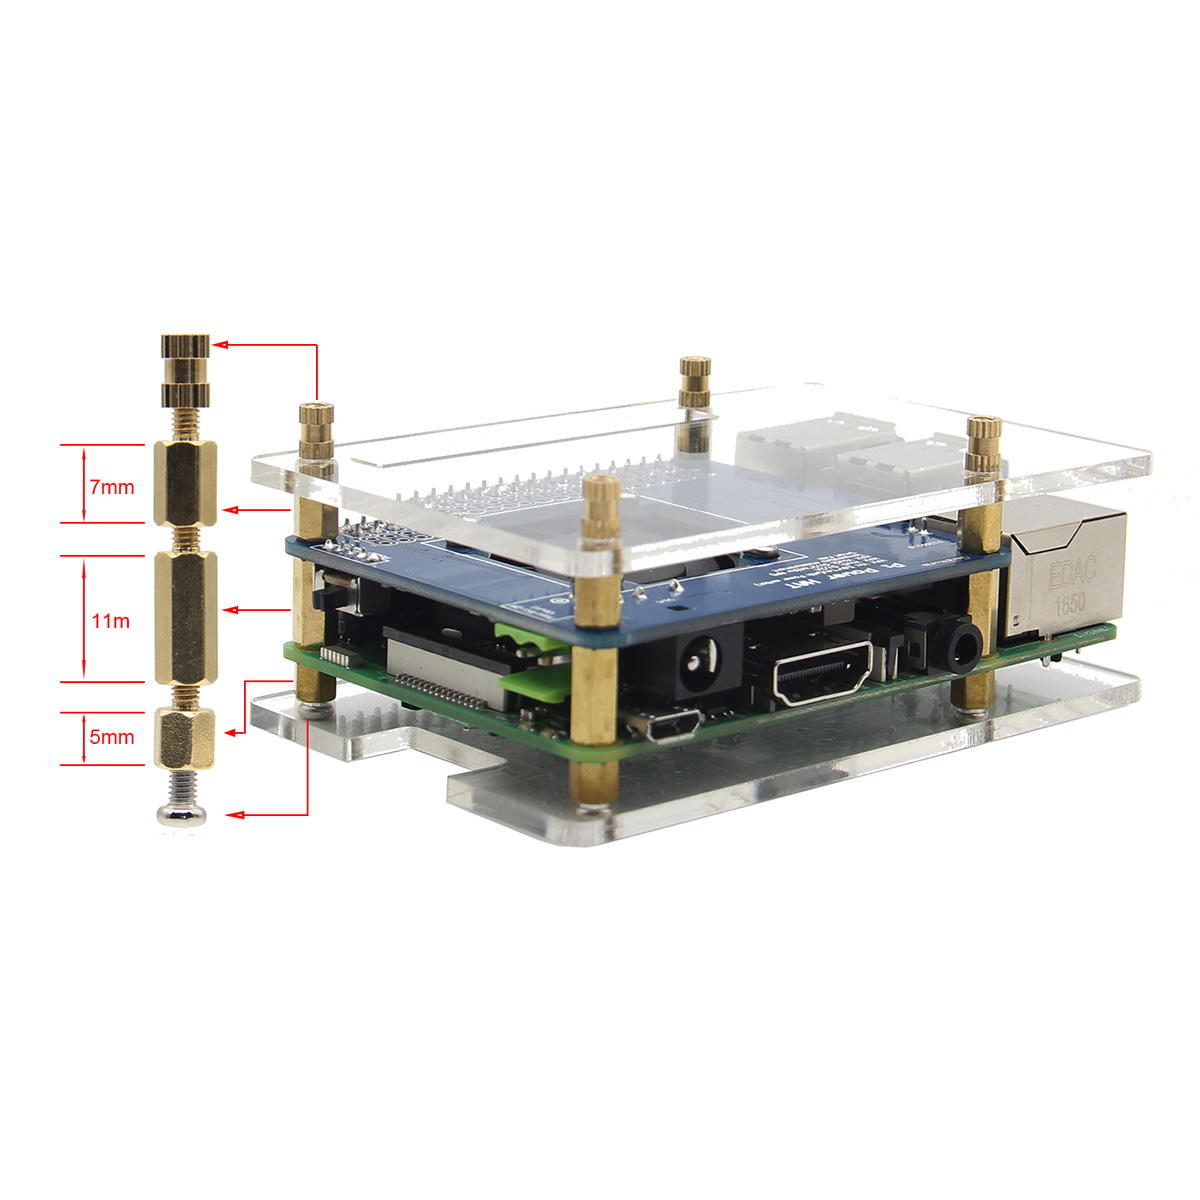 Geekworm-Temperature-Control-Fan-And-Power-Expansion-Board--Acrylic-Case--Copper-Heat-Sink-Kit-1150152